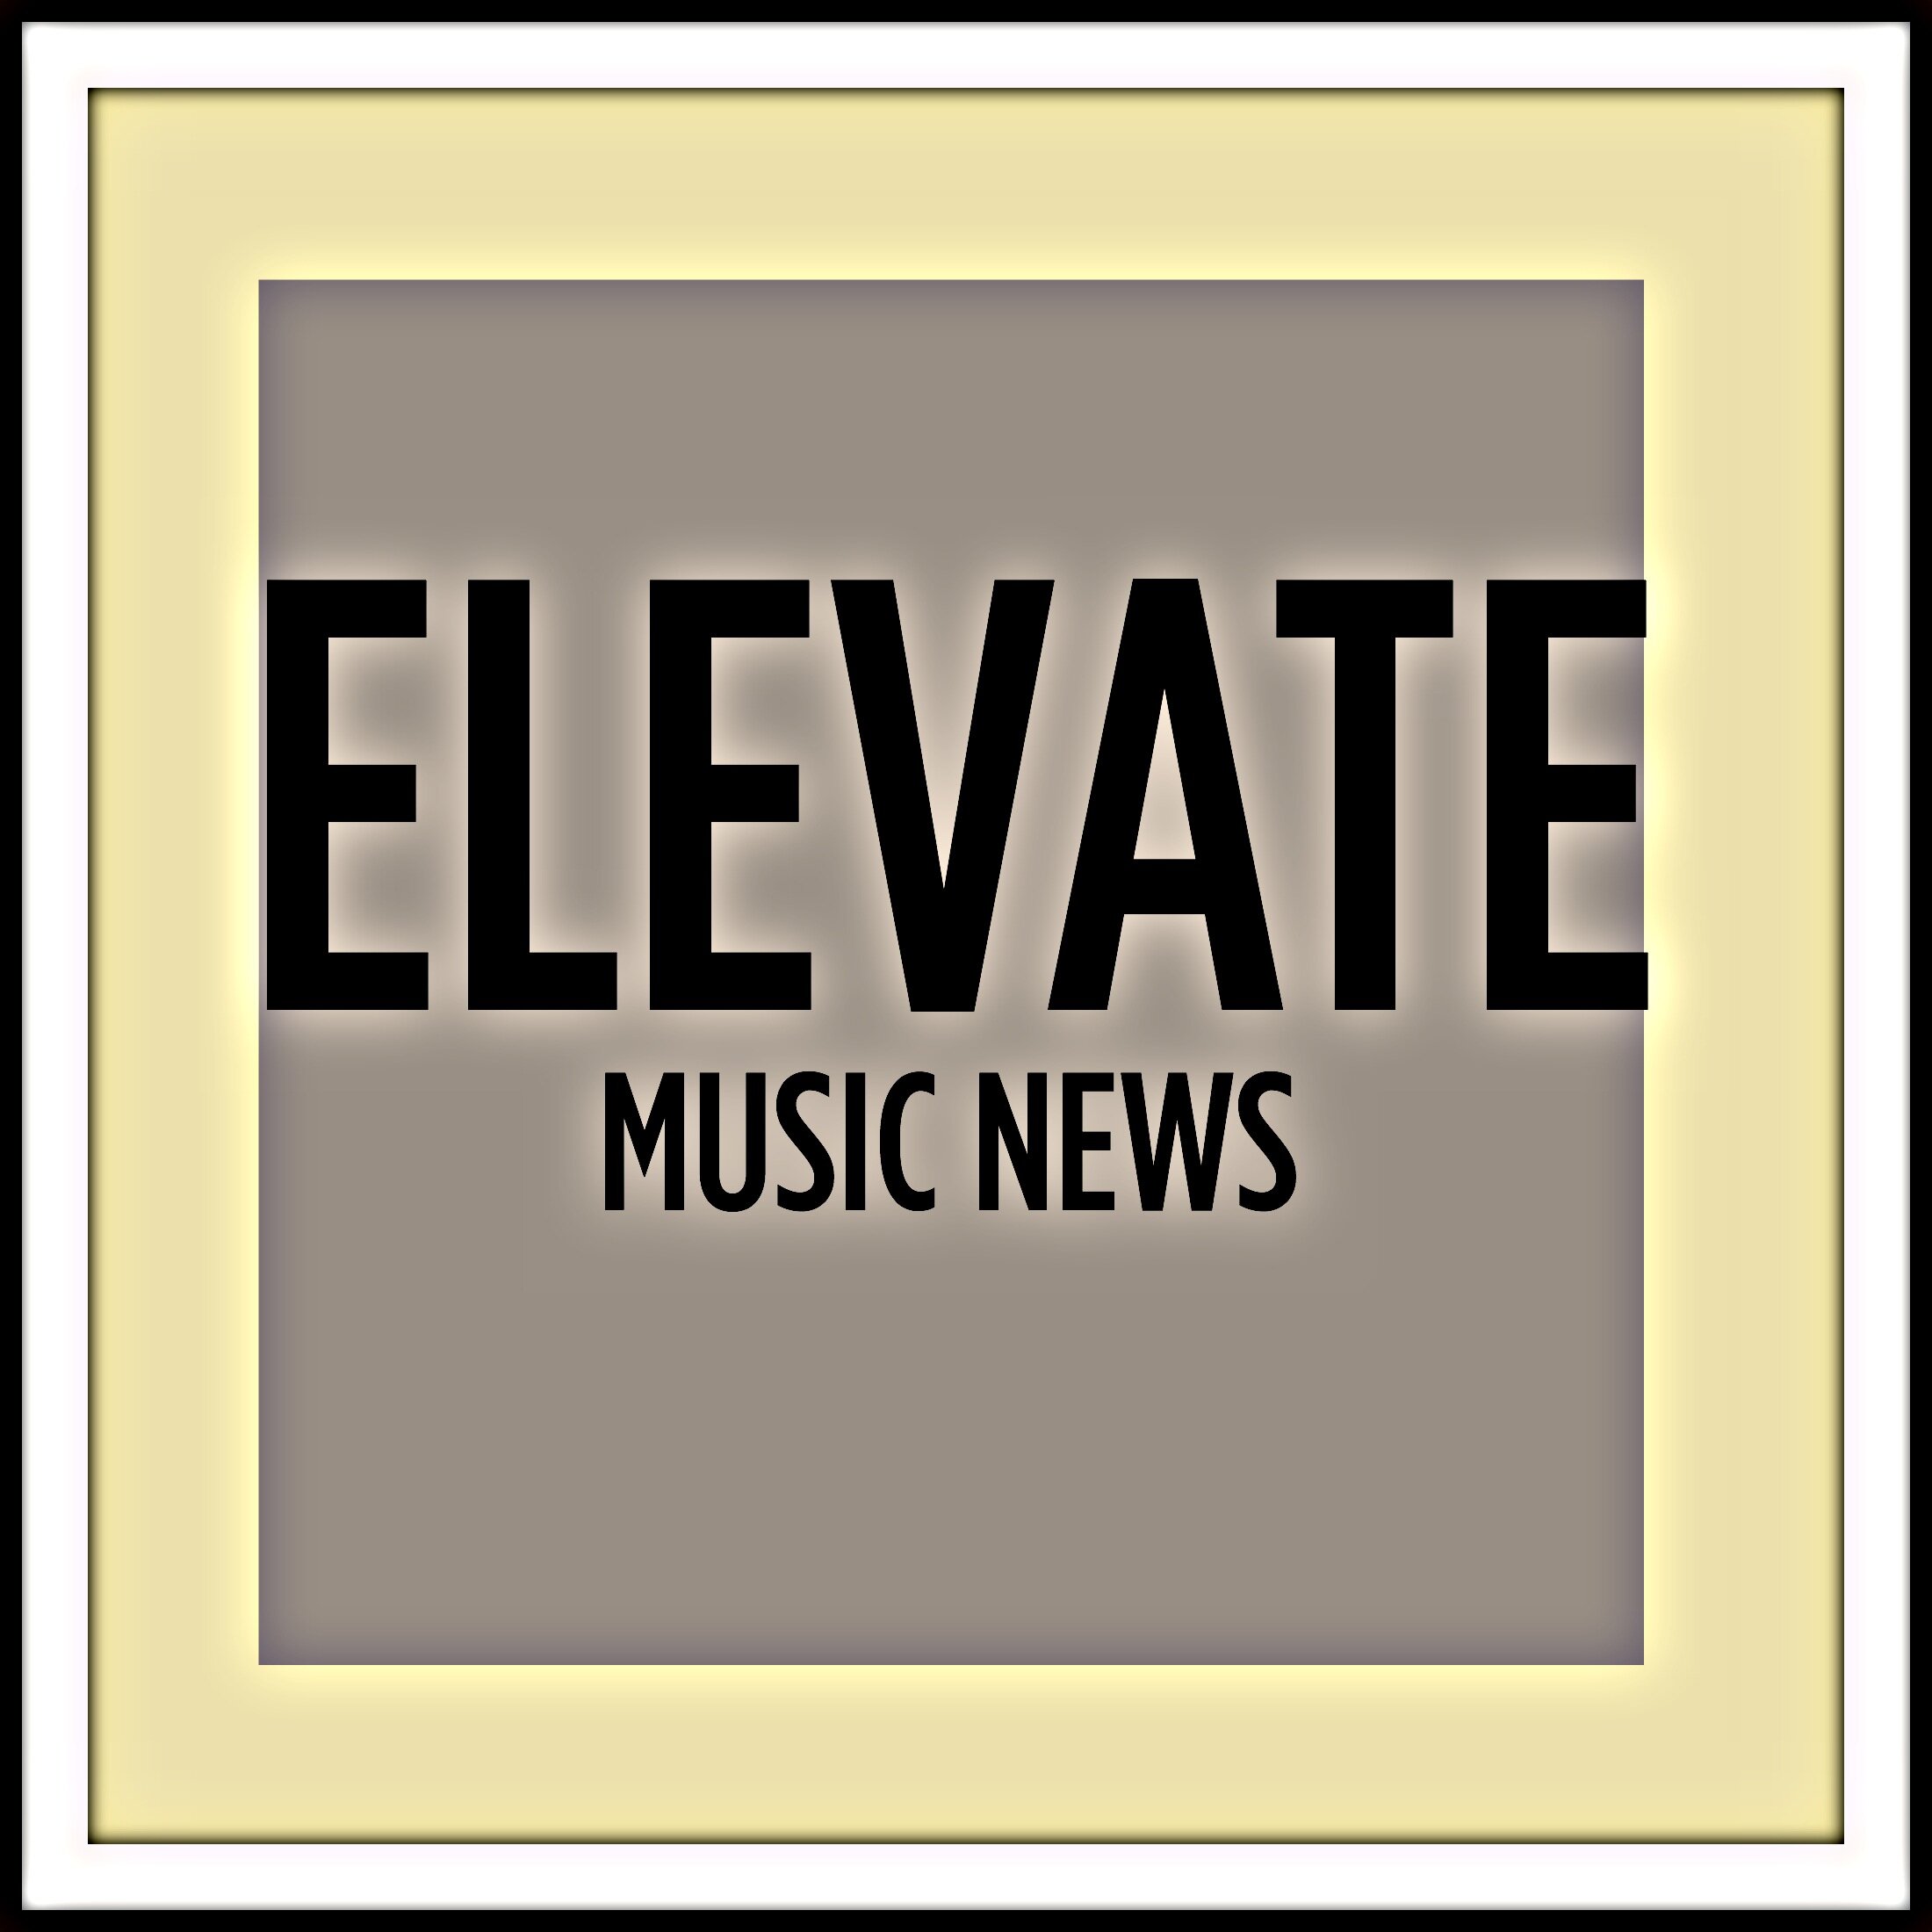 THE NEW AND OFFICIAL TWITTER ACCOUNT OF        ELEVATE MUSIC NEWS.